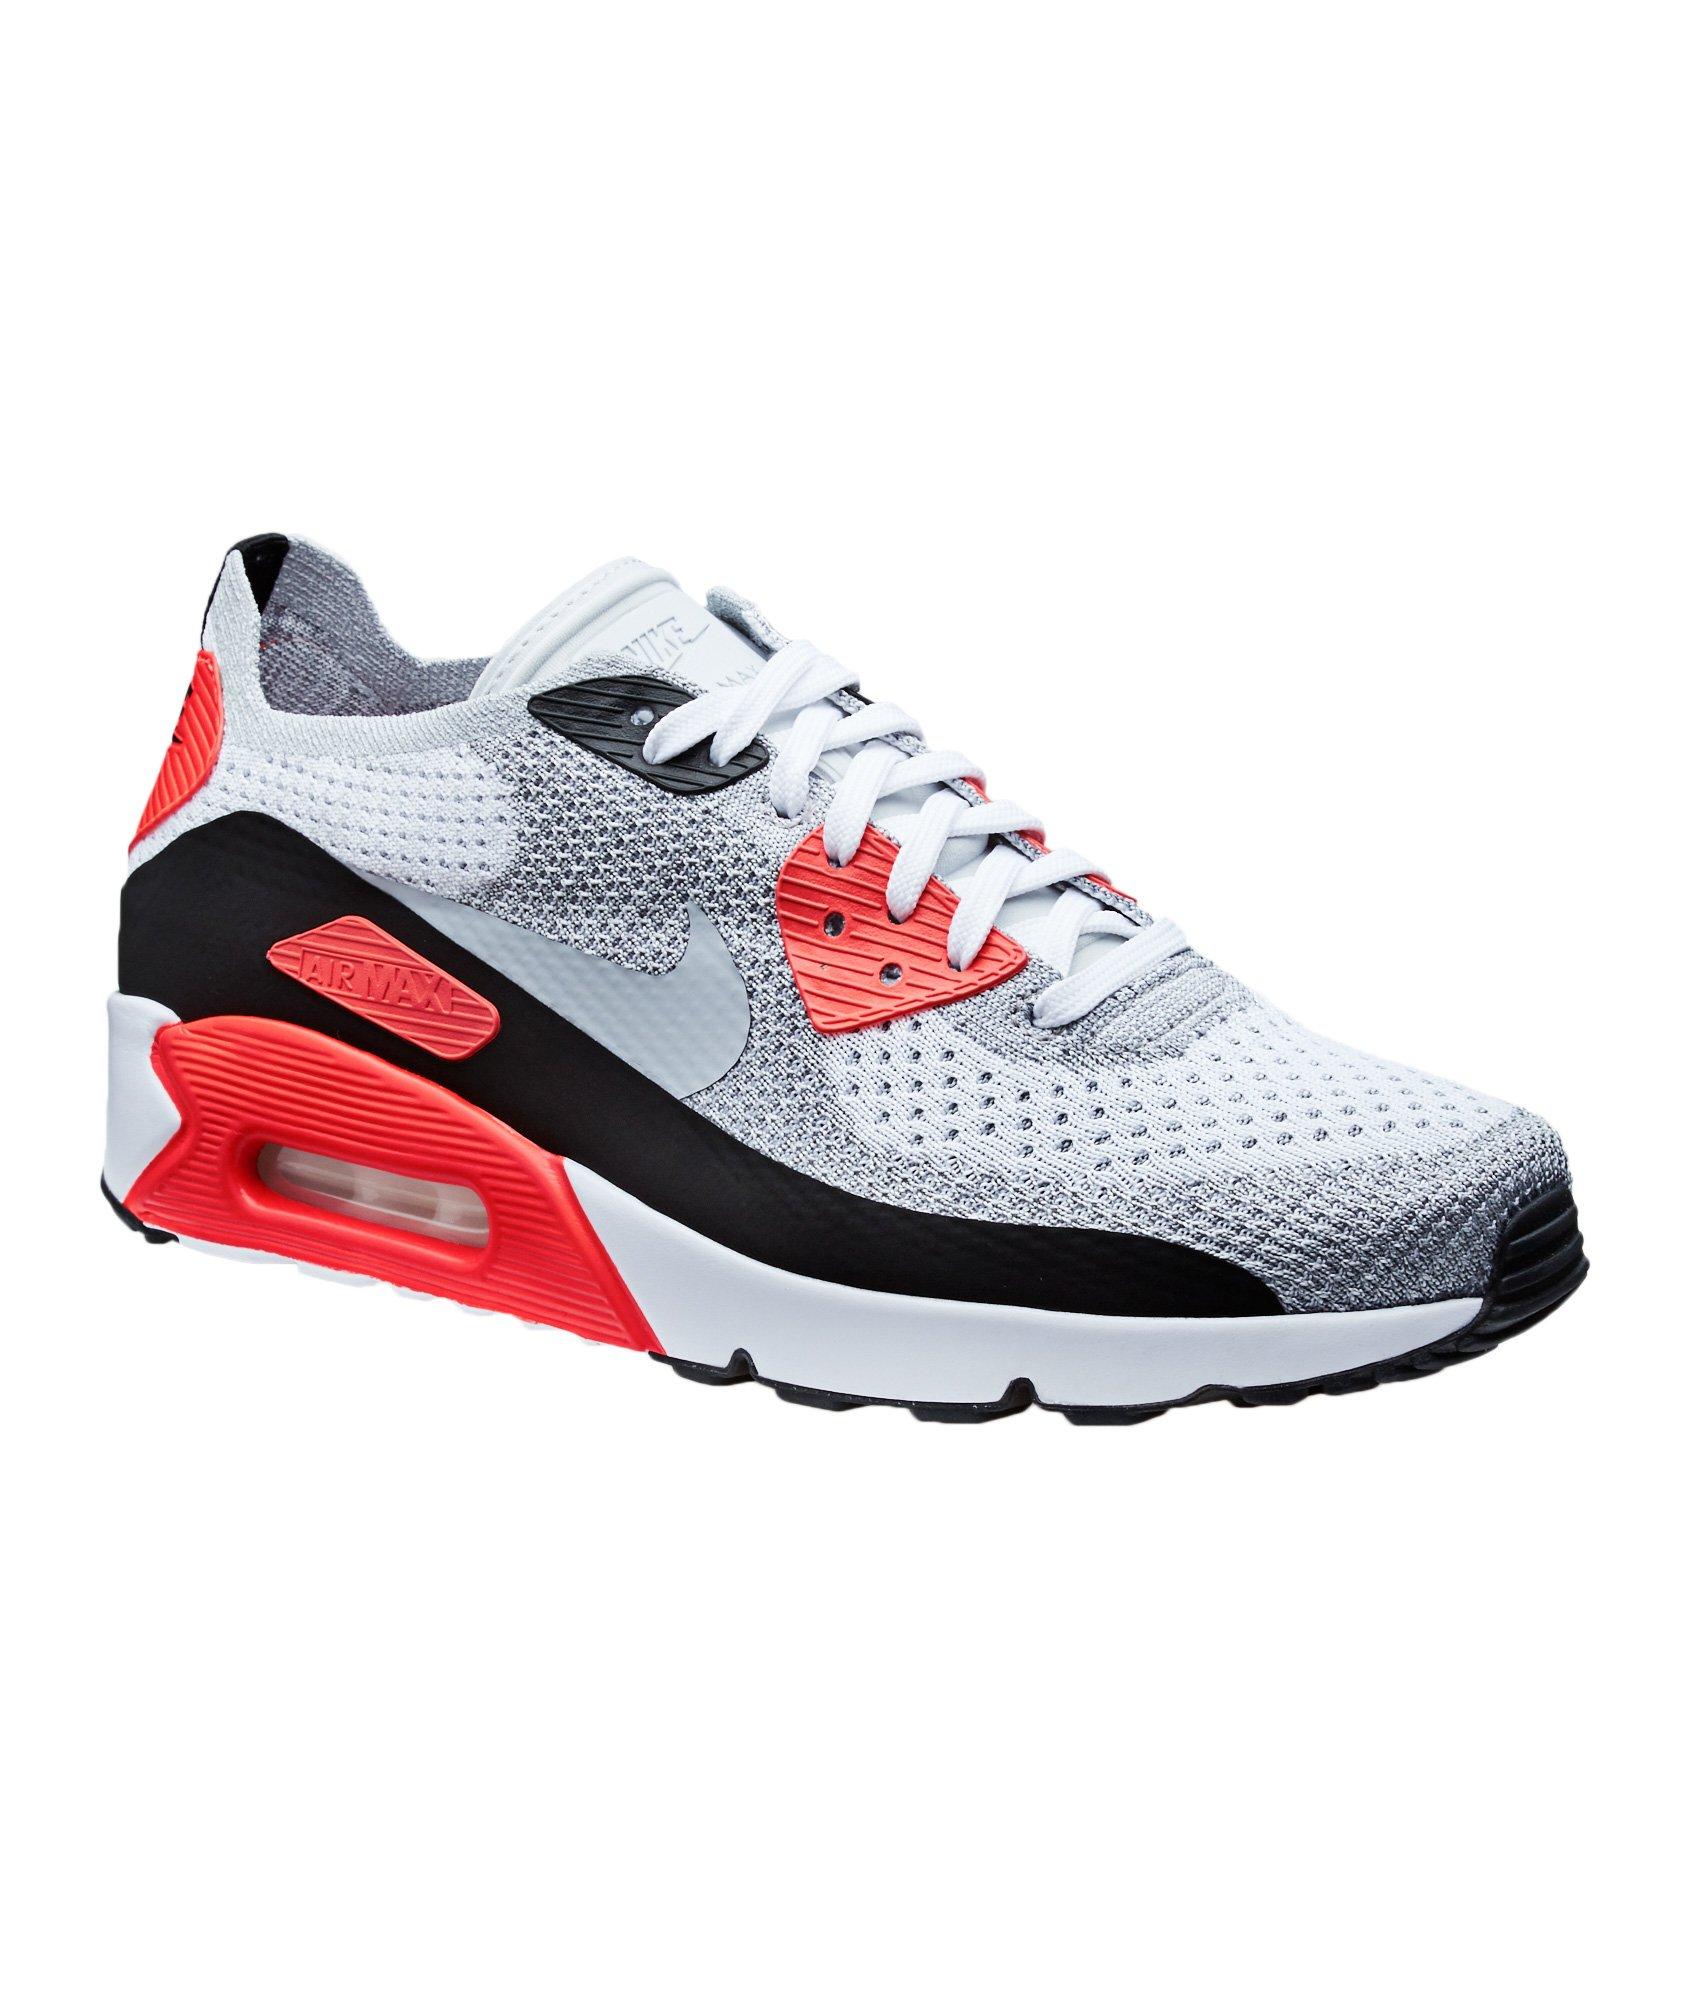 Air Max 90 Ultra 2.0 FlyKnit Sneakers image 0